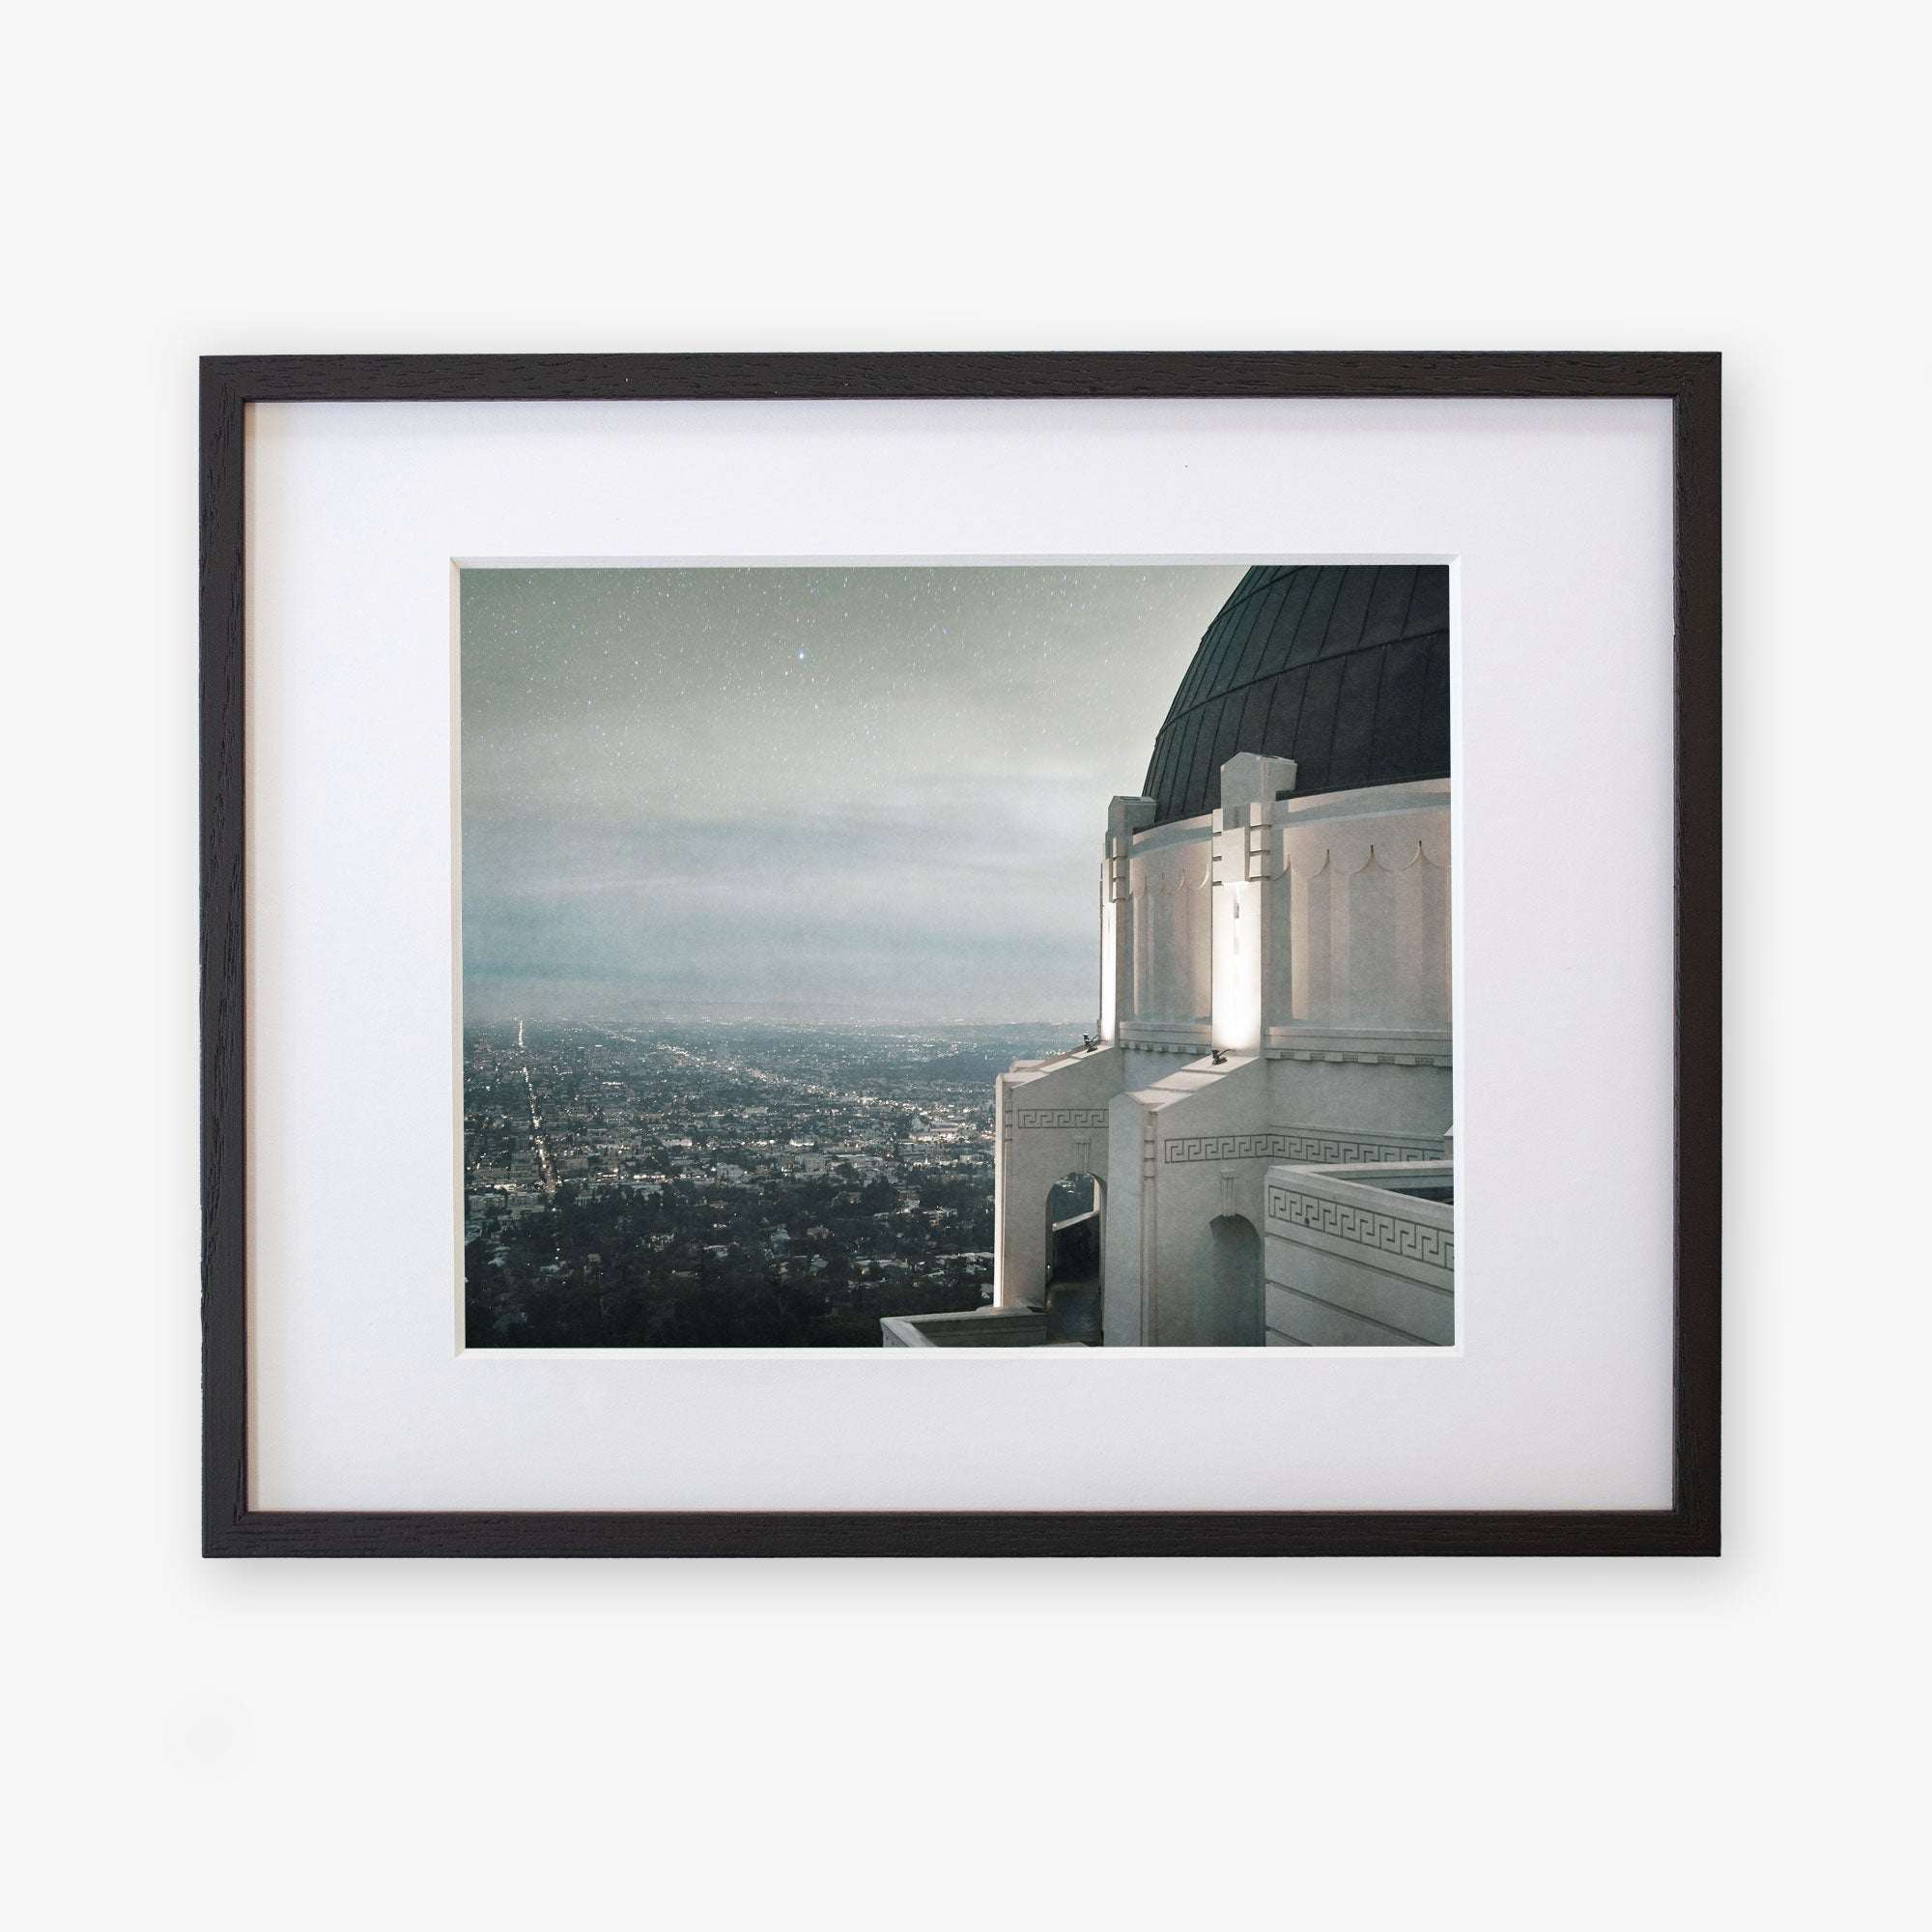 Framed archival photographic print of Offley Green&#39;s &#39;The Sky At Night&#39; Griffith Observatory Print at dusk overlooking the Los Angeles city view with twinkling stars above.